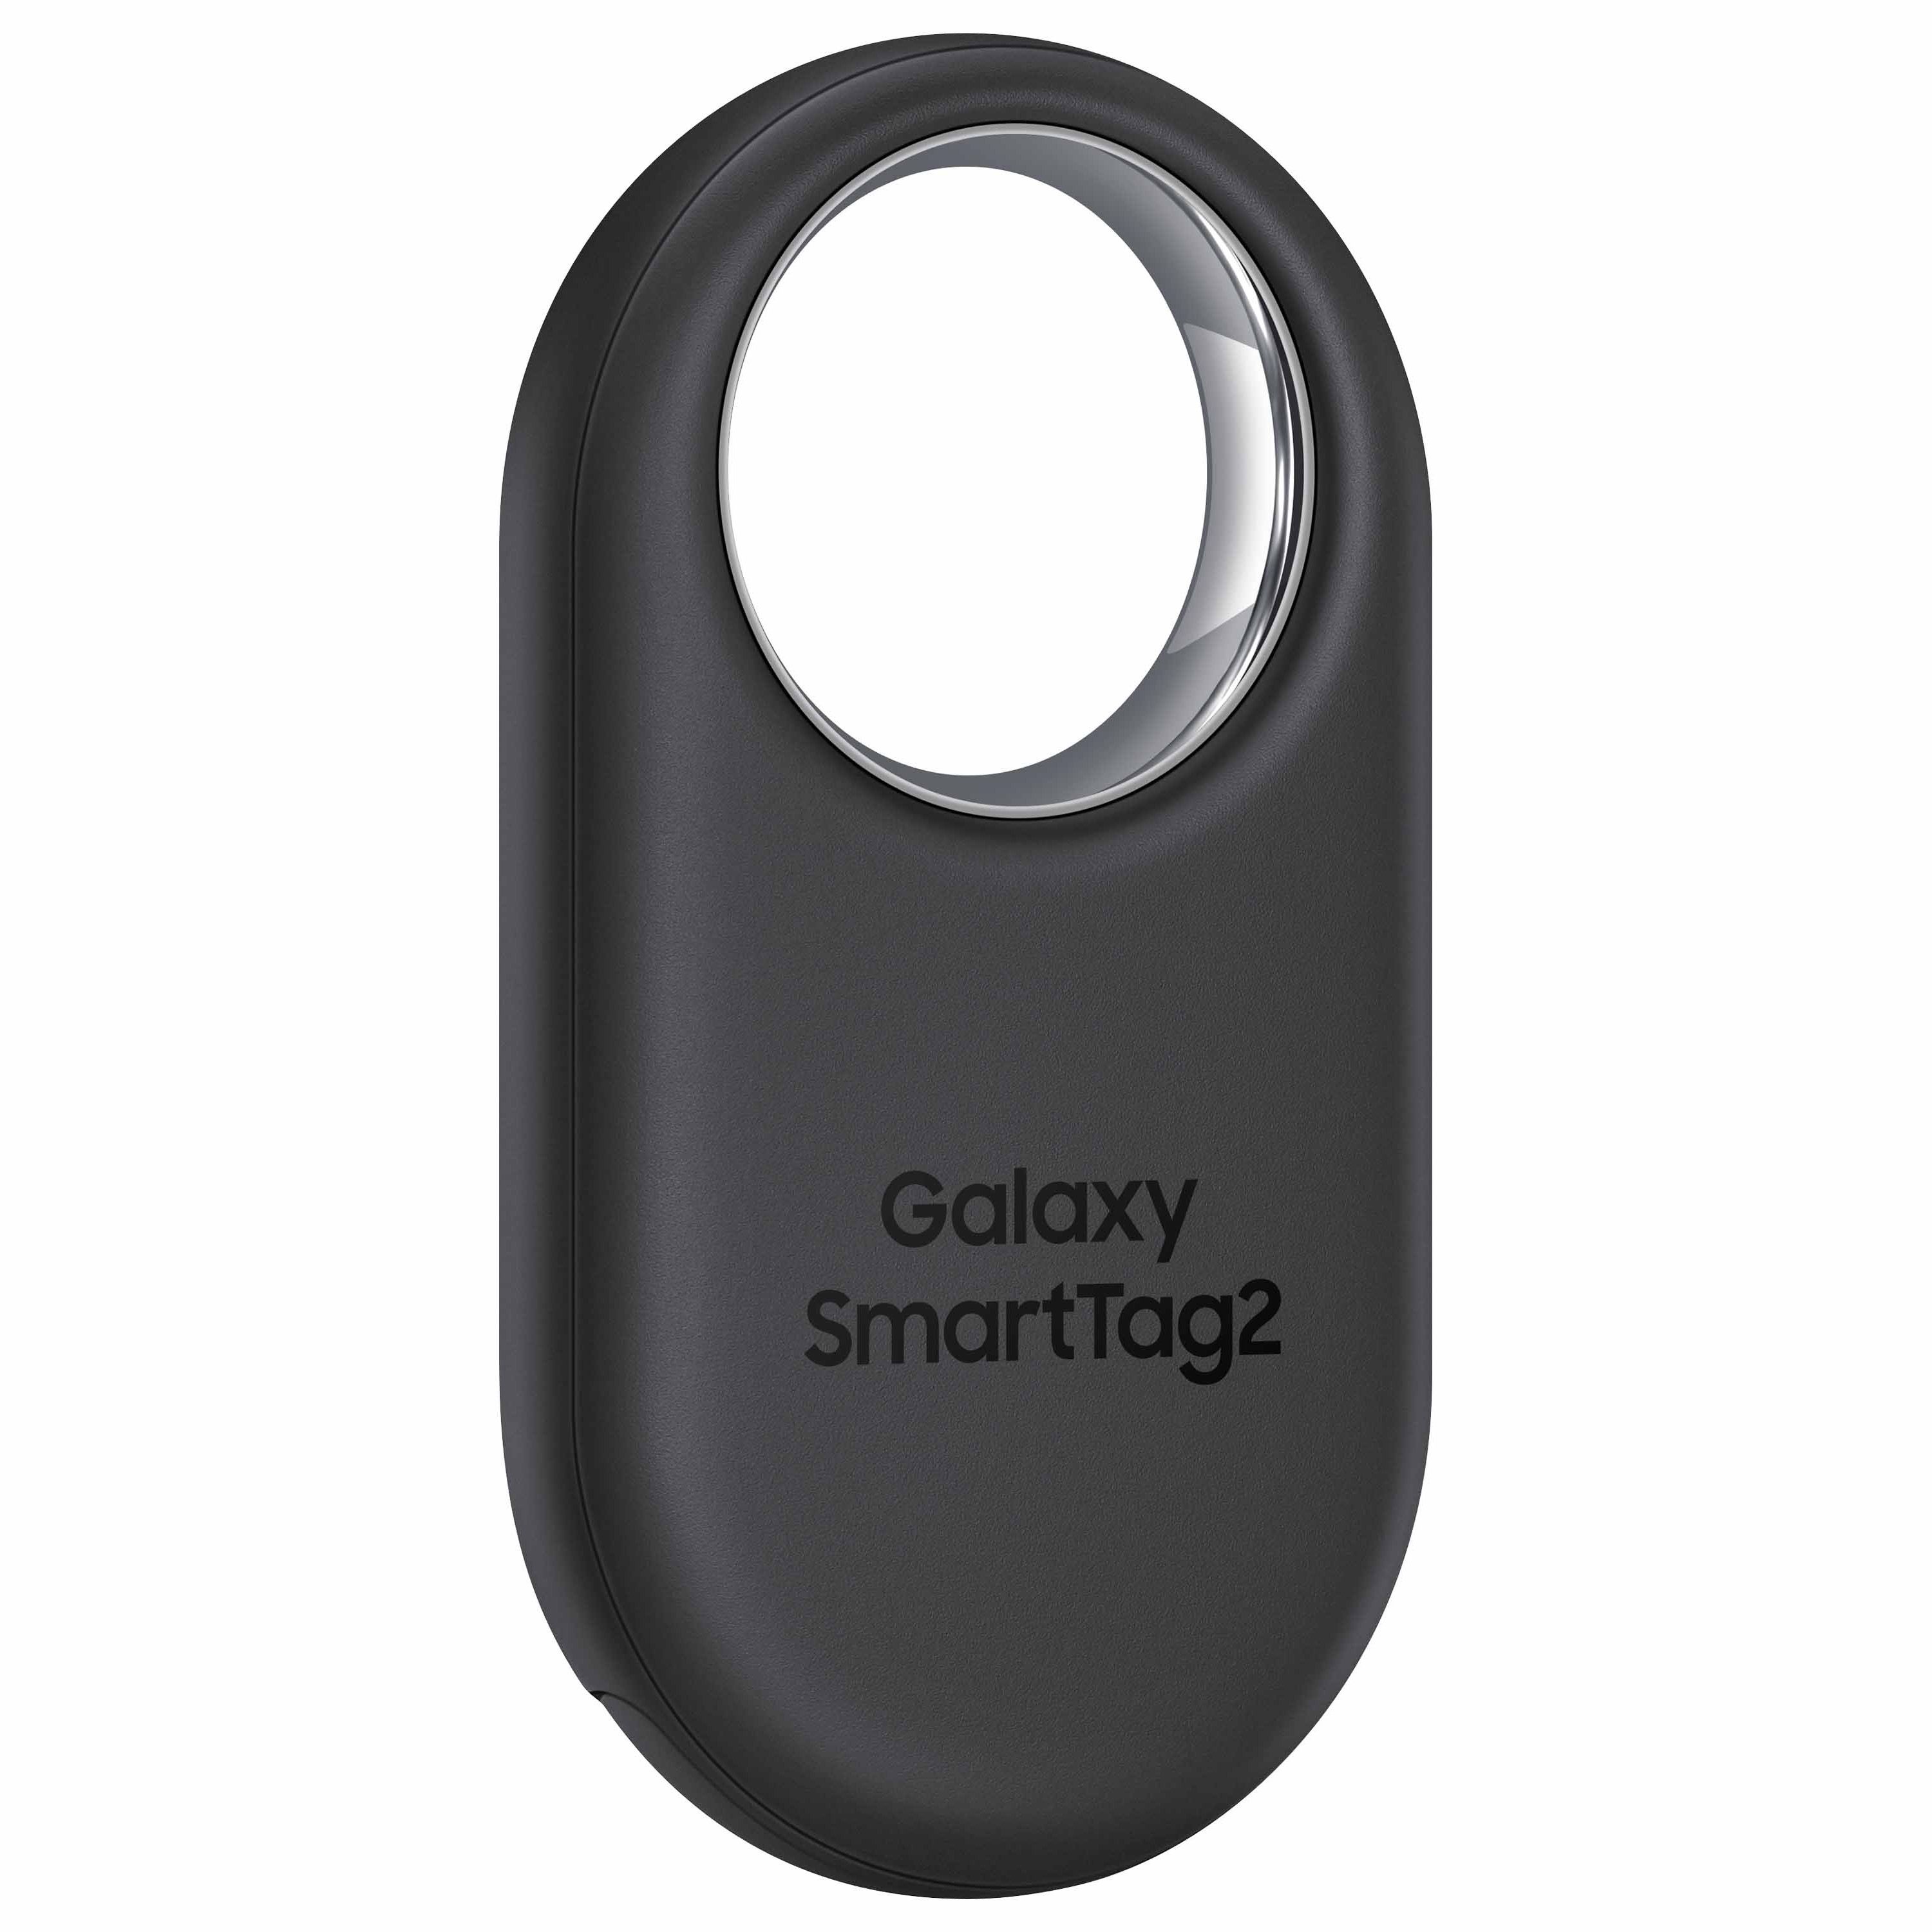 Samsung Galaxy SmartTag 2 vs. Chipolo One: Ecosystem or universal